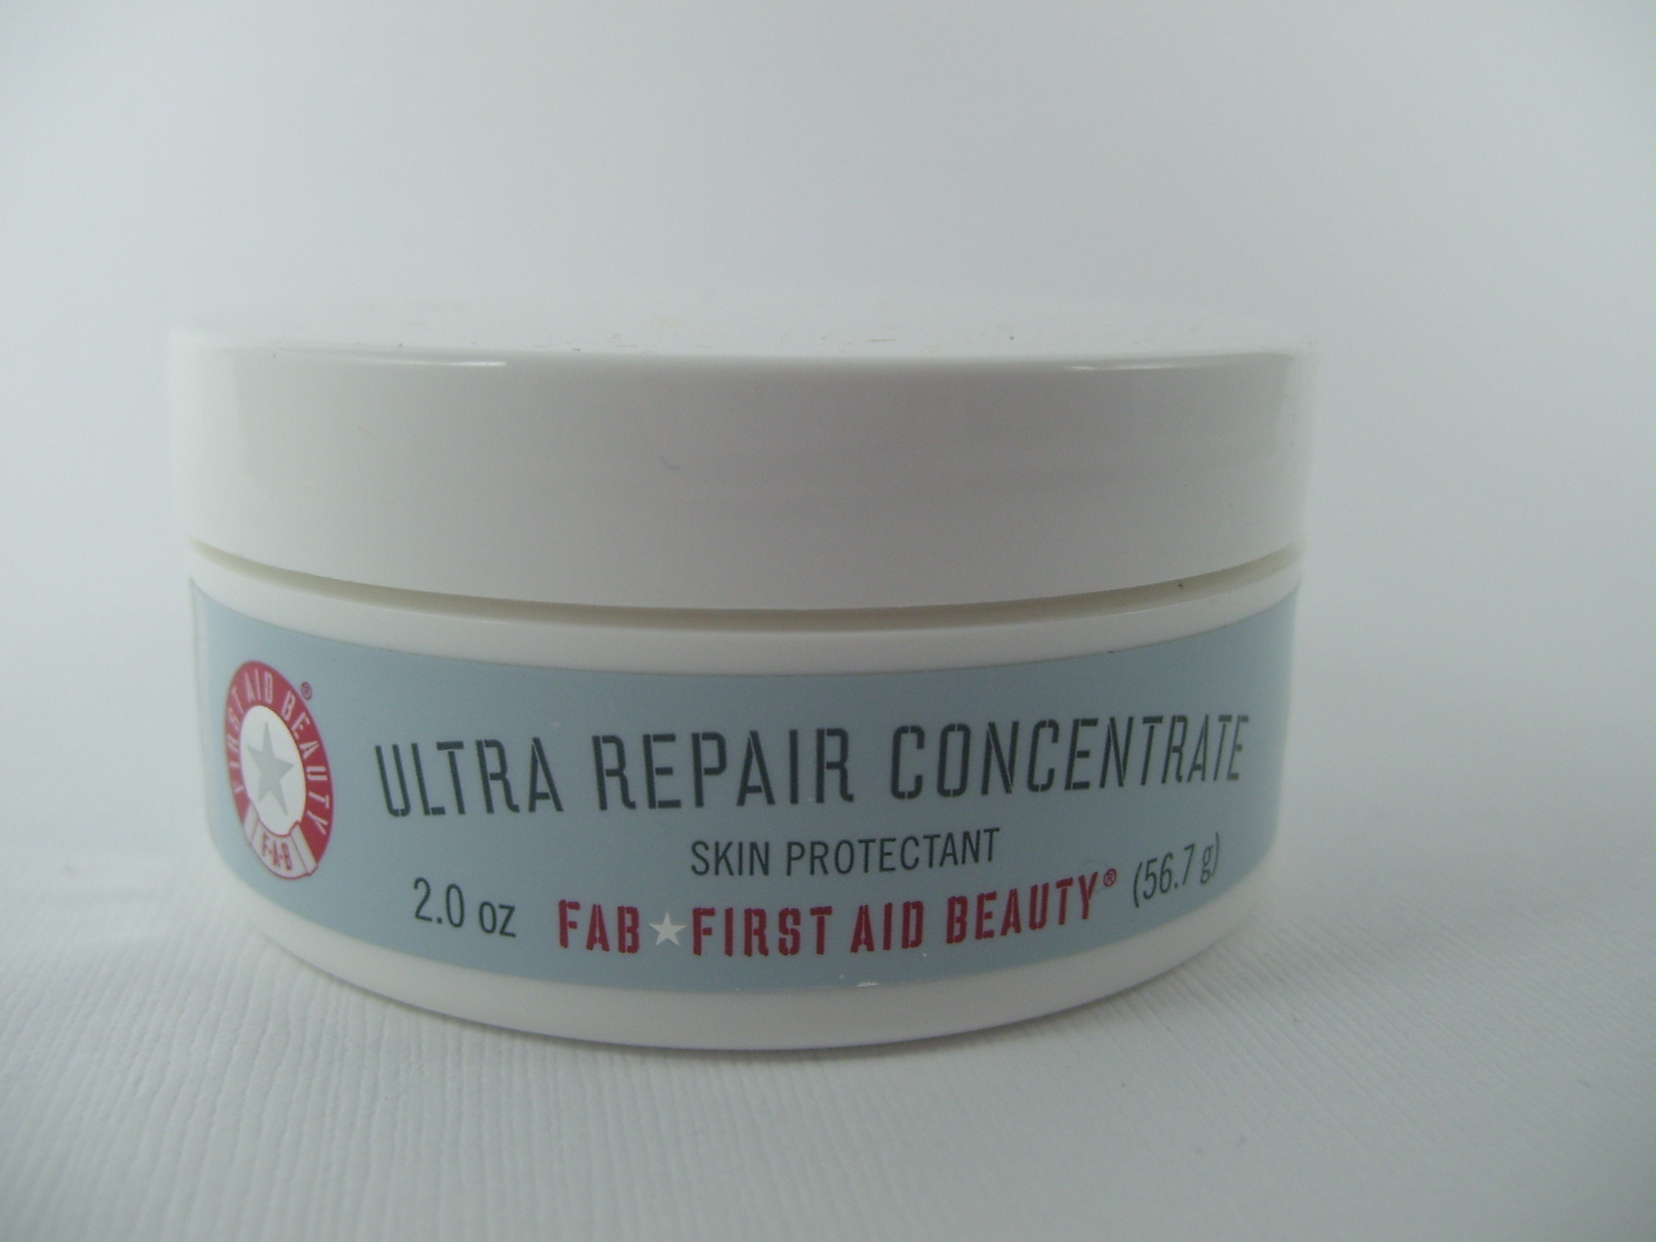 Review:  First Aid Beauty (FAB) Ultra Repair Concentrate